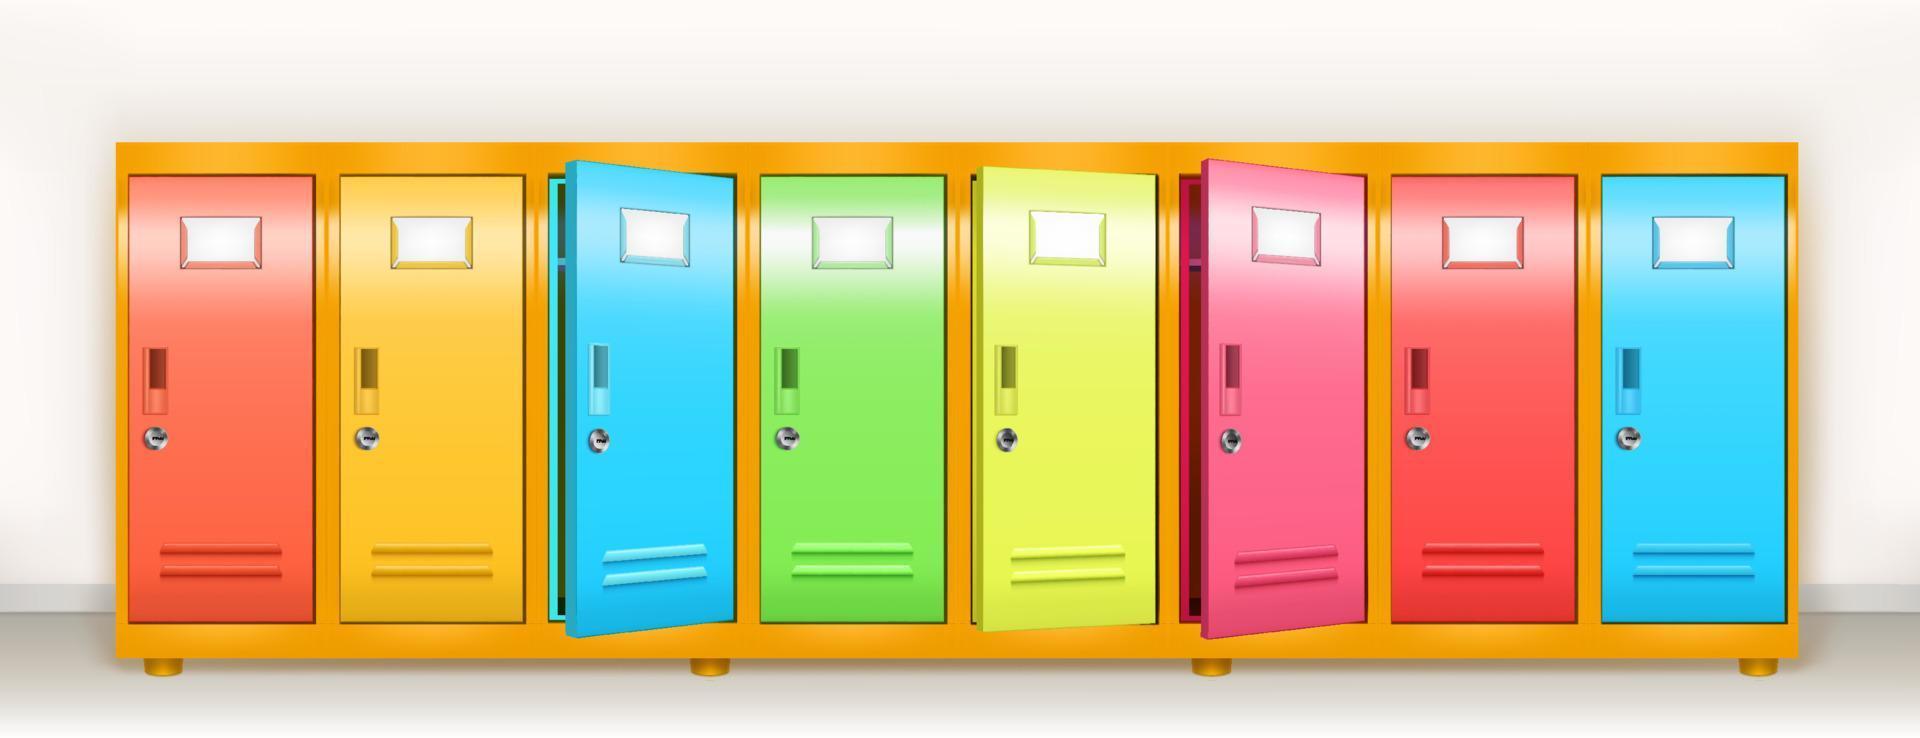 Colorful lockers, school or gym changing room vector